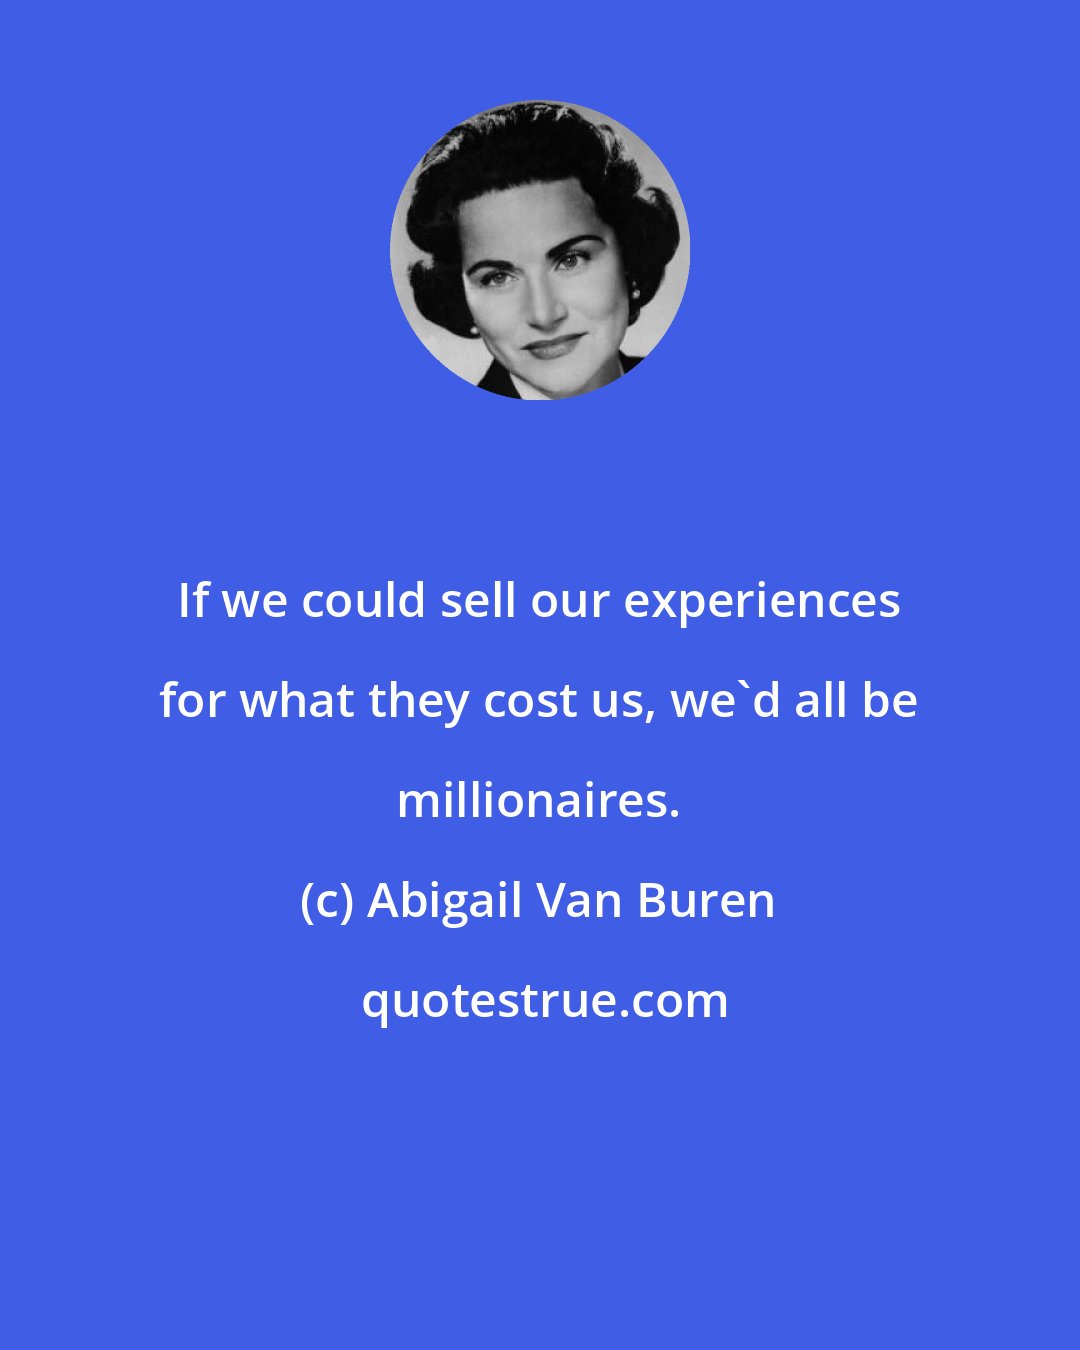 Abigail Van Buren: If we could sell our experiences for what they cost us, we'd all be millionaires.